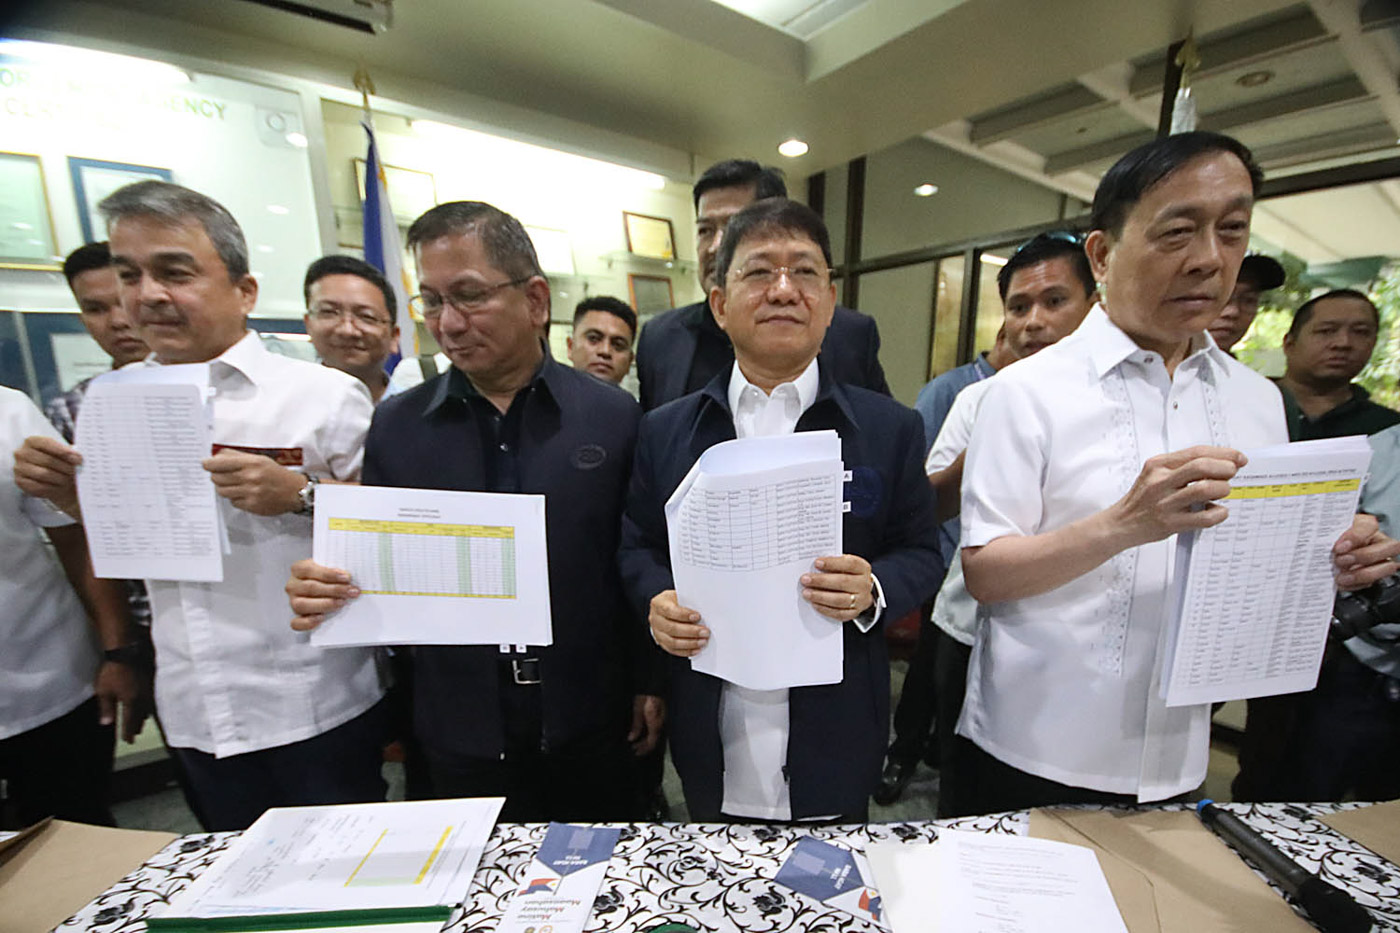 DRUG LIST OUT. The government releases a list of barangay officials allegedly involved in drugs, during a press conference at the Philippine Drug Enforcement Agency headquarters in Quezon City on April 30, 2018. Photo by Darren Langit/Rappler  